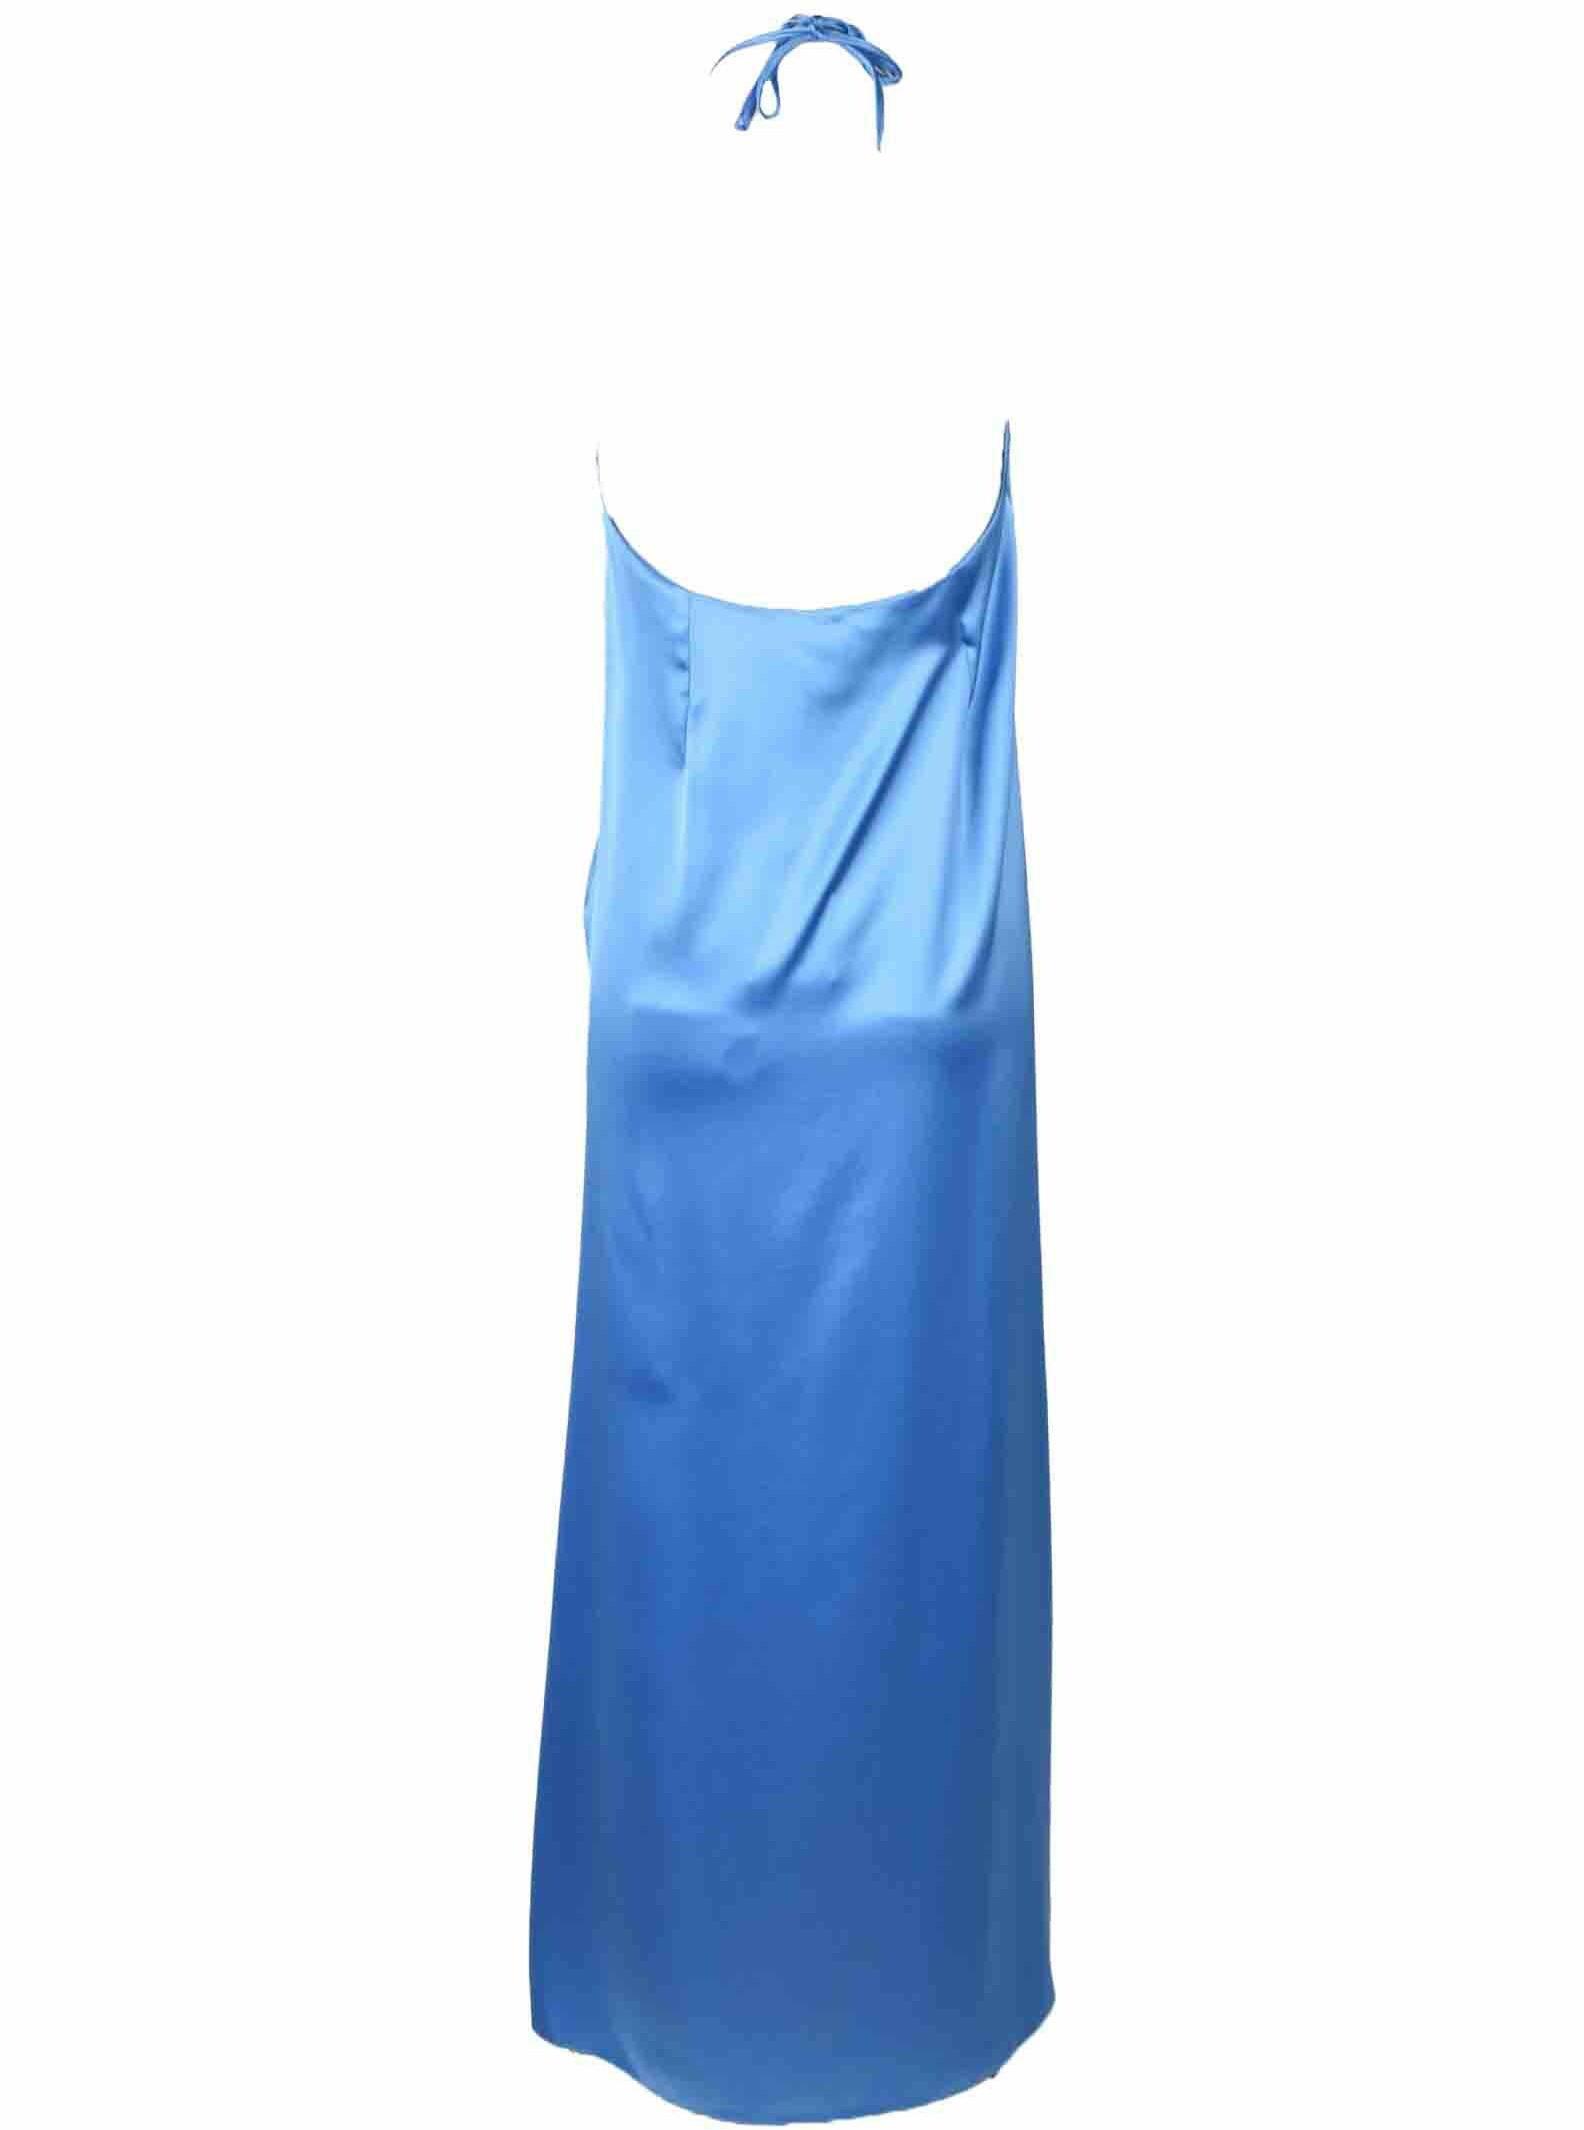 Actualee Women's Sky Blue Dress 40 IT at FORZIERI Canada